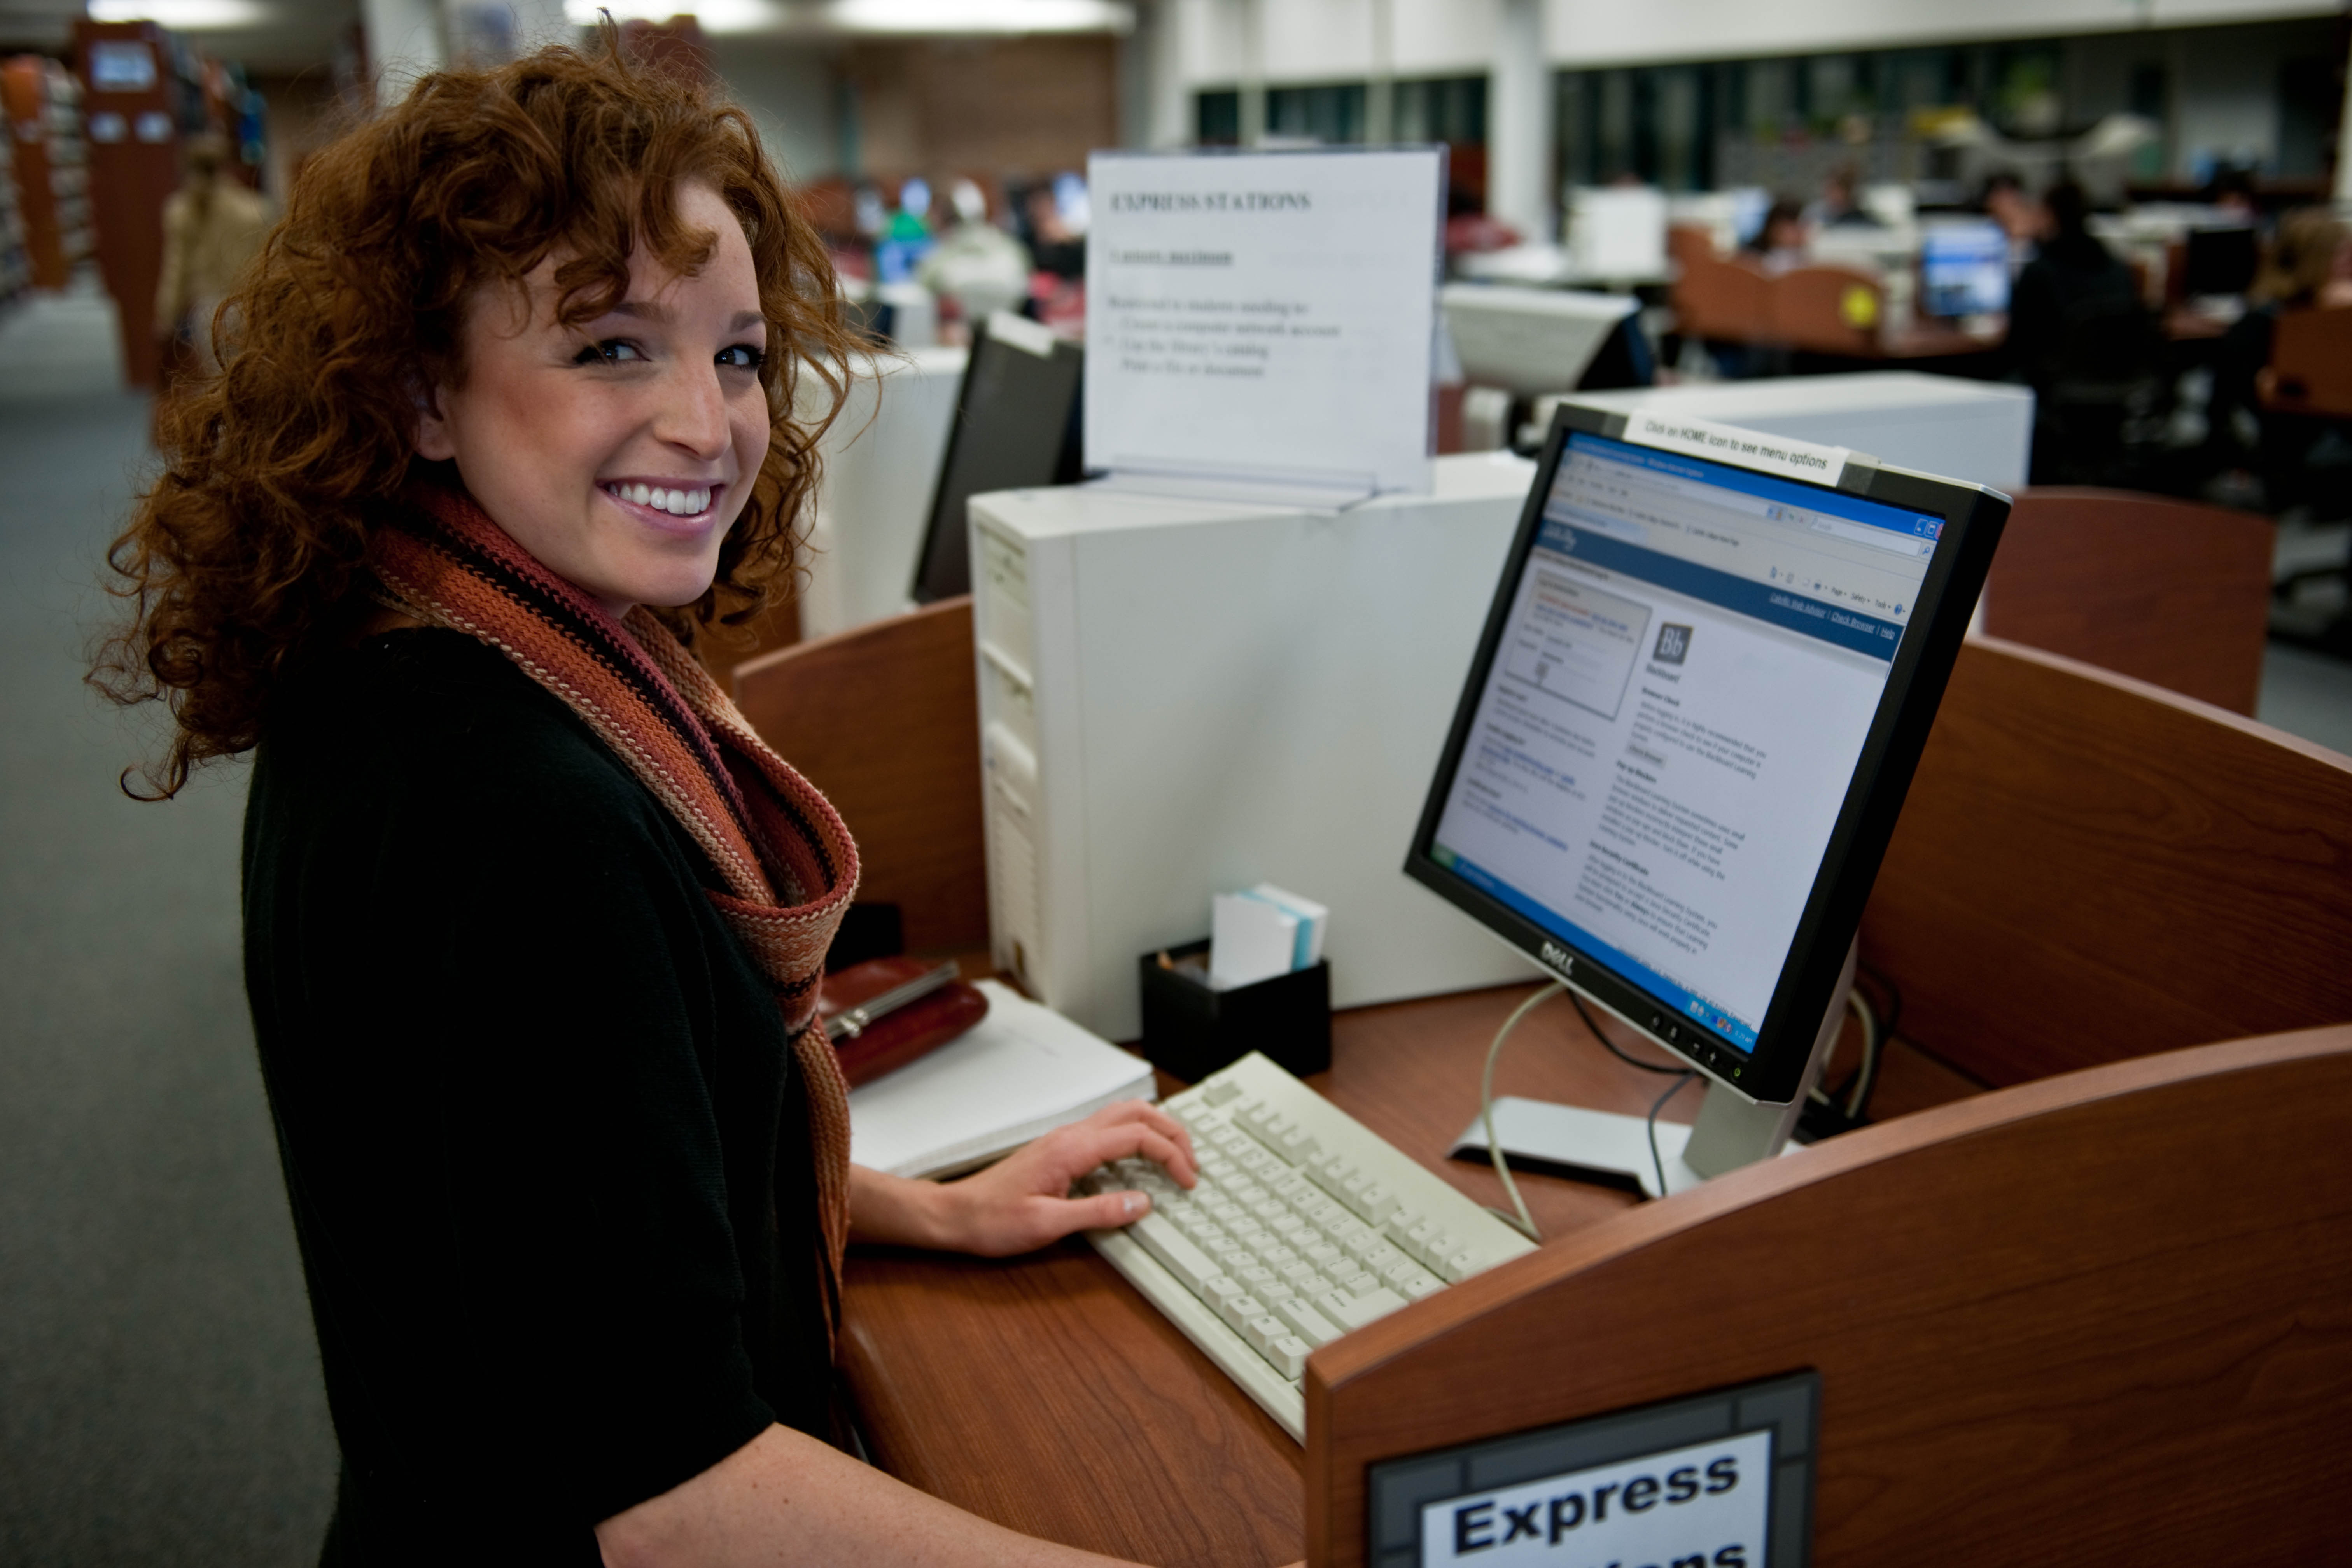 Student using an express station to print at the library